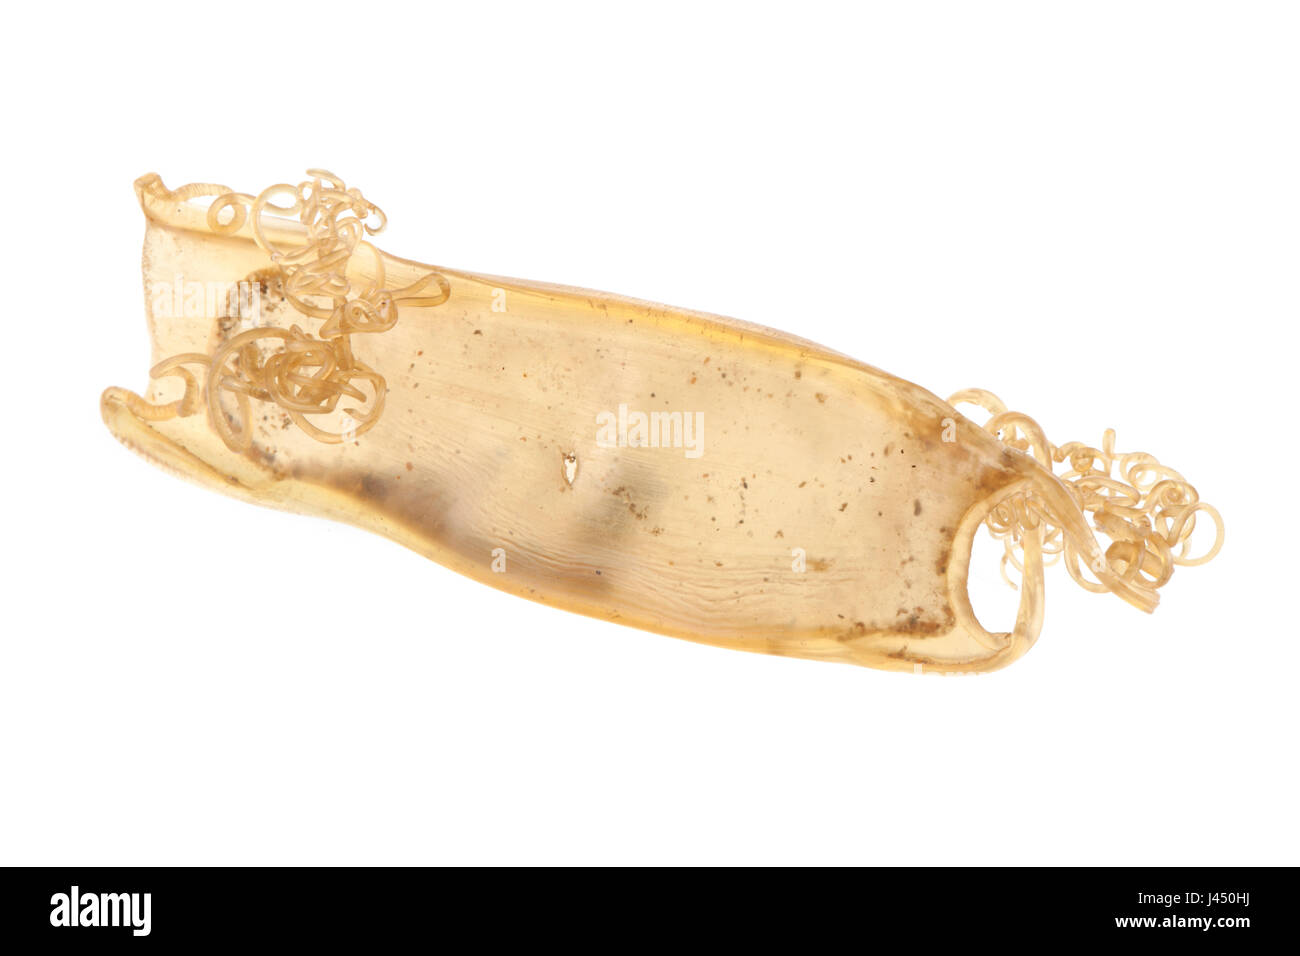 Egg of lesser spotted dogfish isolated against a white background; Stock Photo